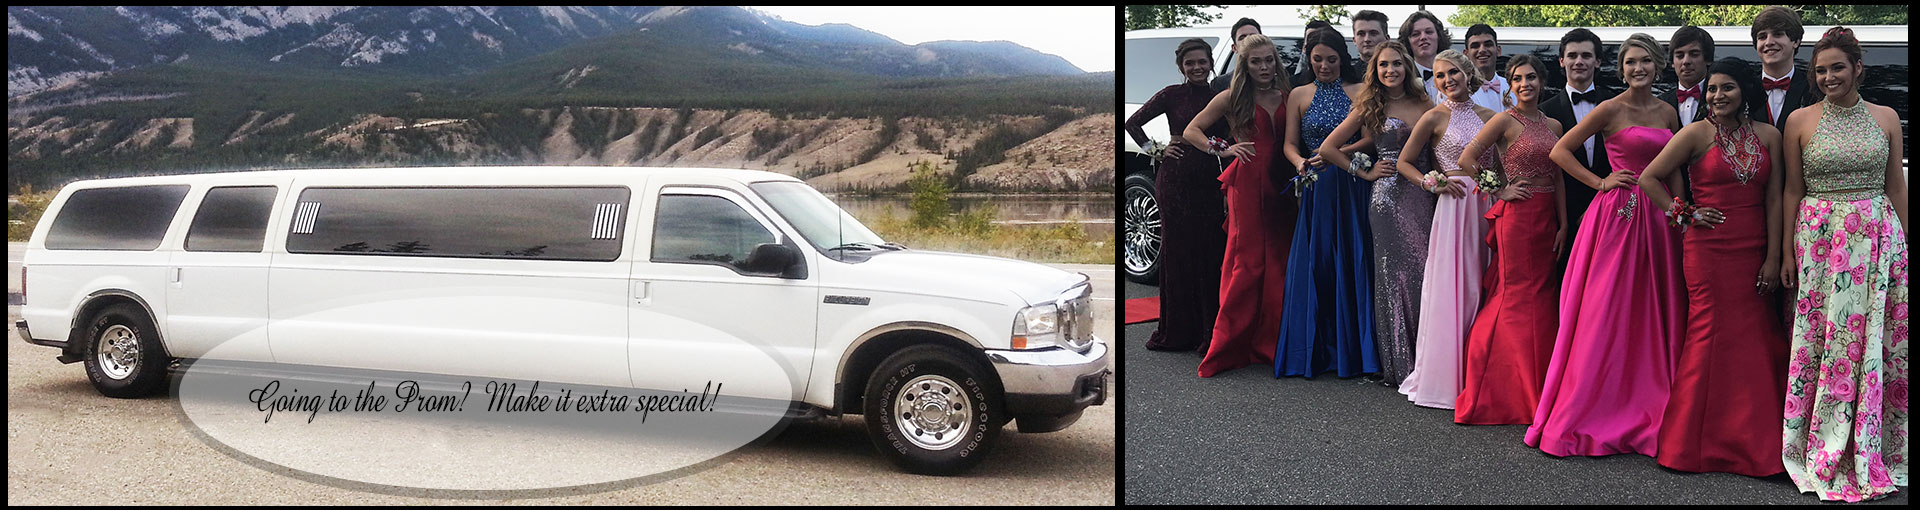 About Accent Limousine in Kelowna